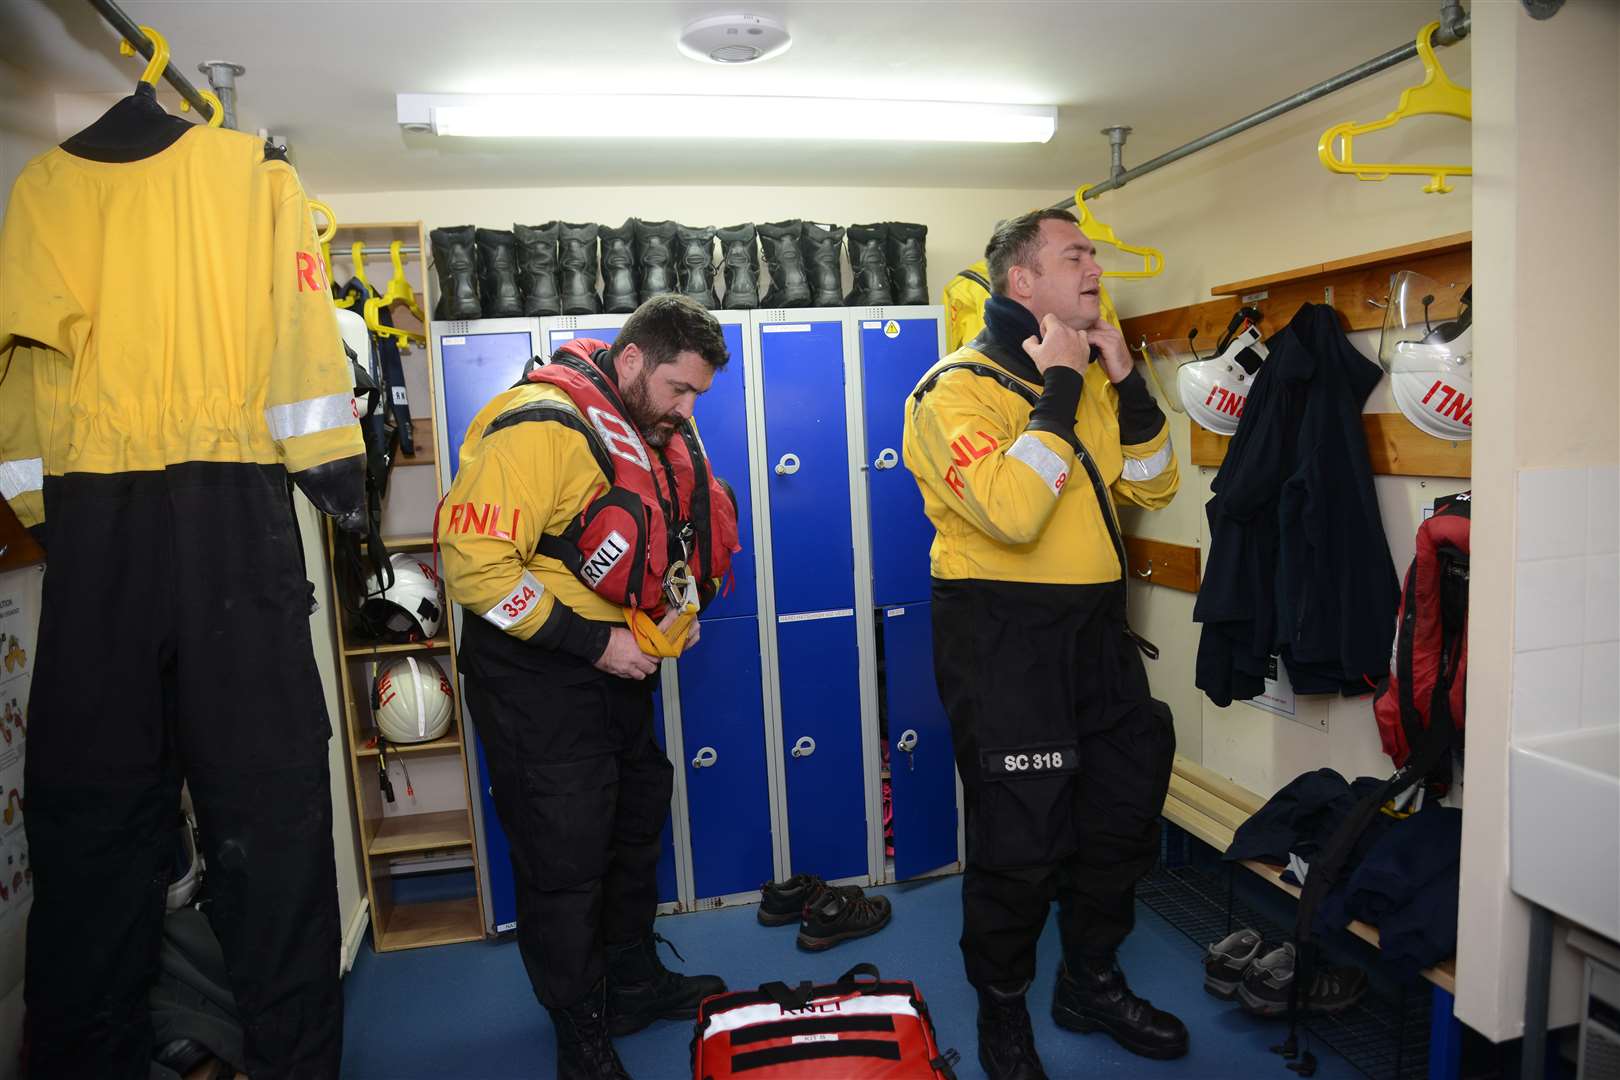 Volunteer crew members Alan Carr and Stewart Challis getting kitted out